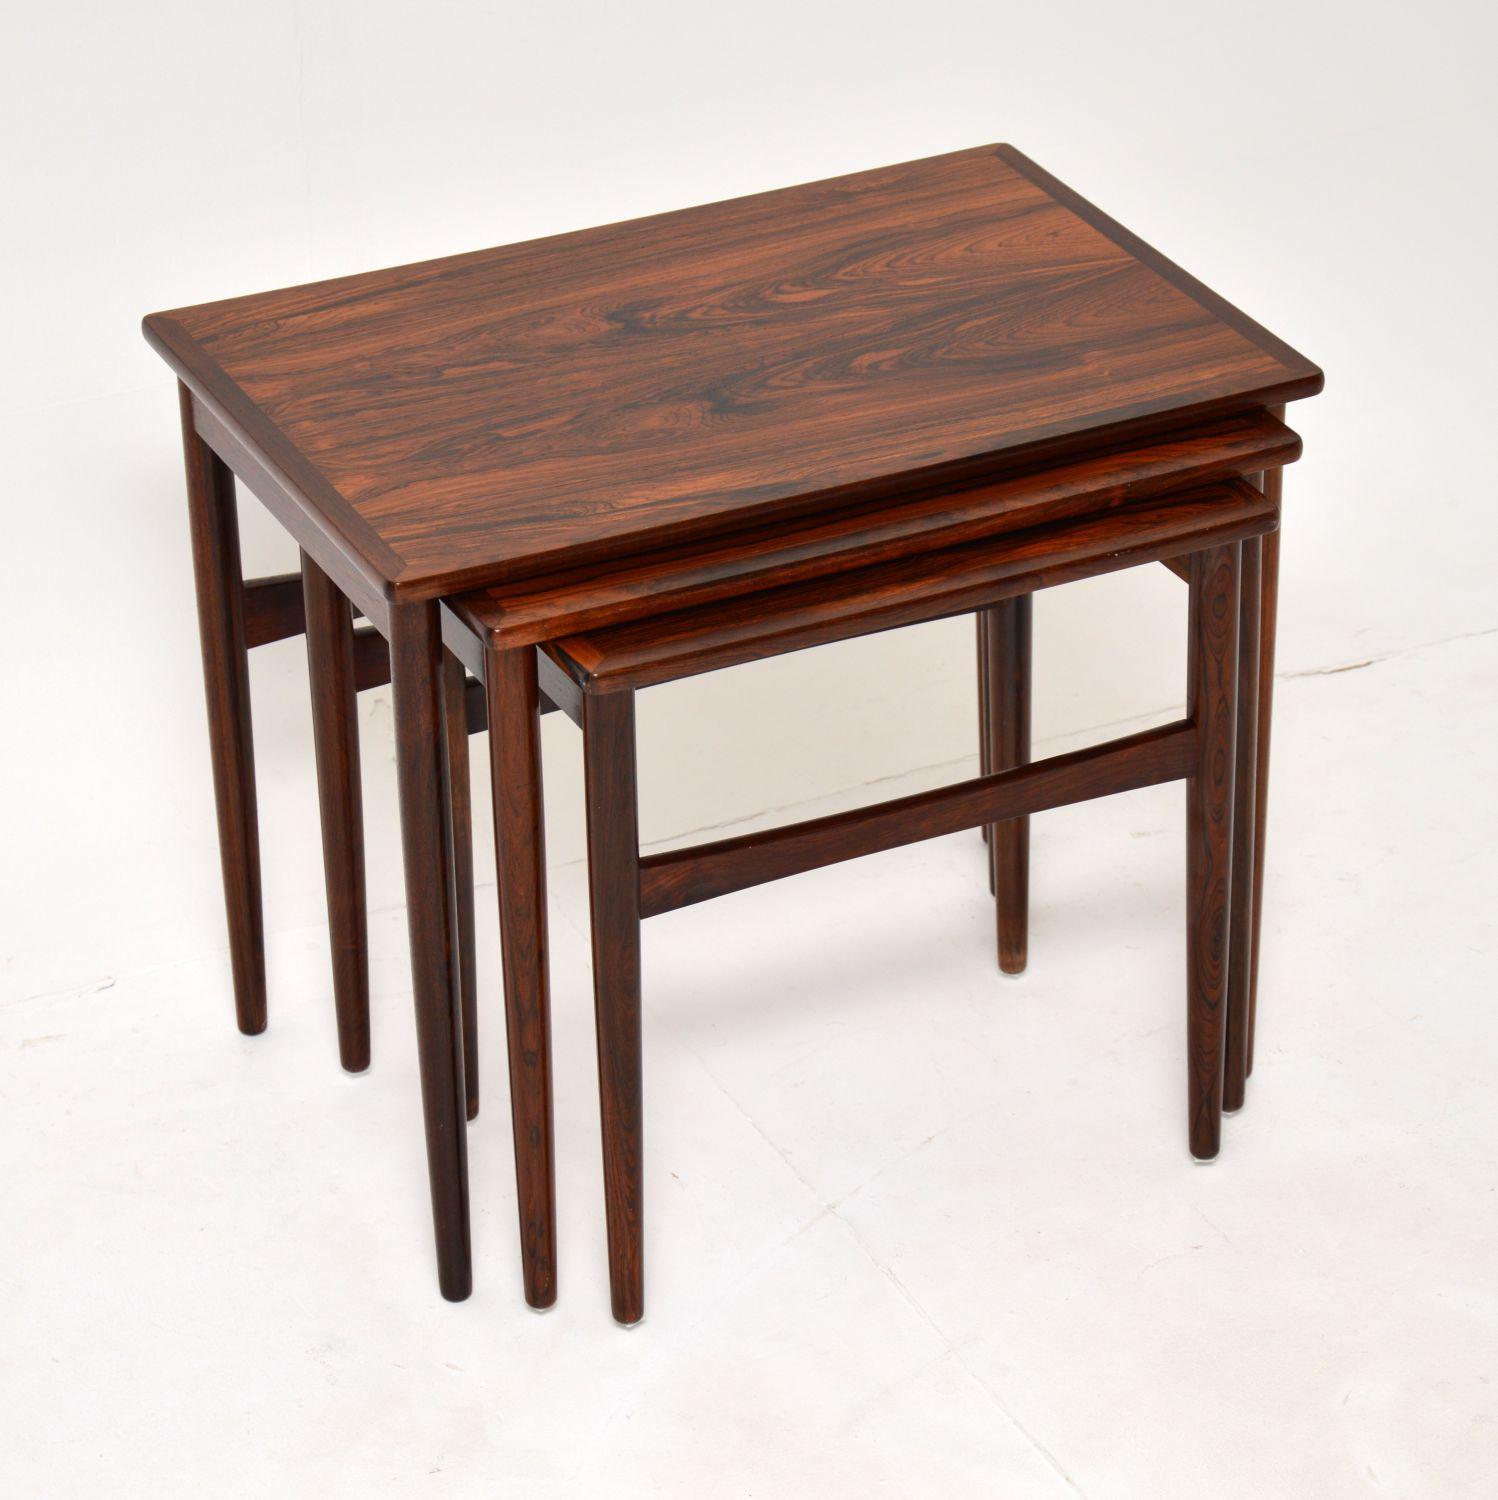 A superb vintage Danish nest of three tables. These were made by BR Glested in Denmark, they date from the 1960’s.

They have a gorgeous design and are of amazing quality. Elegant and compact, these are also solidly built. The wood grain patterns